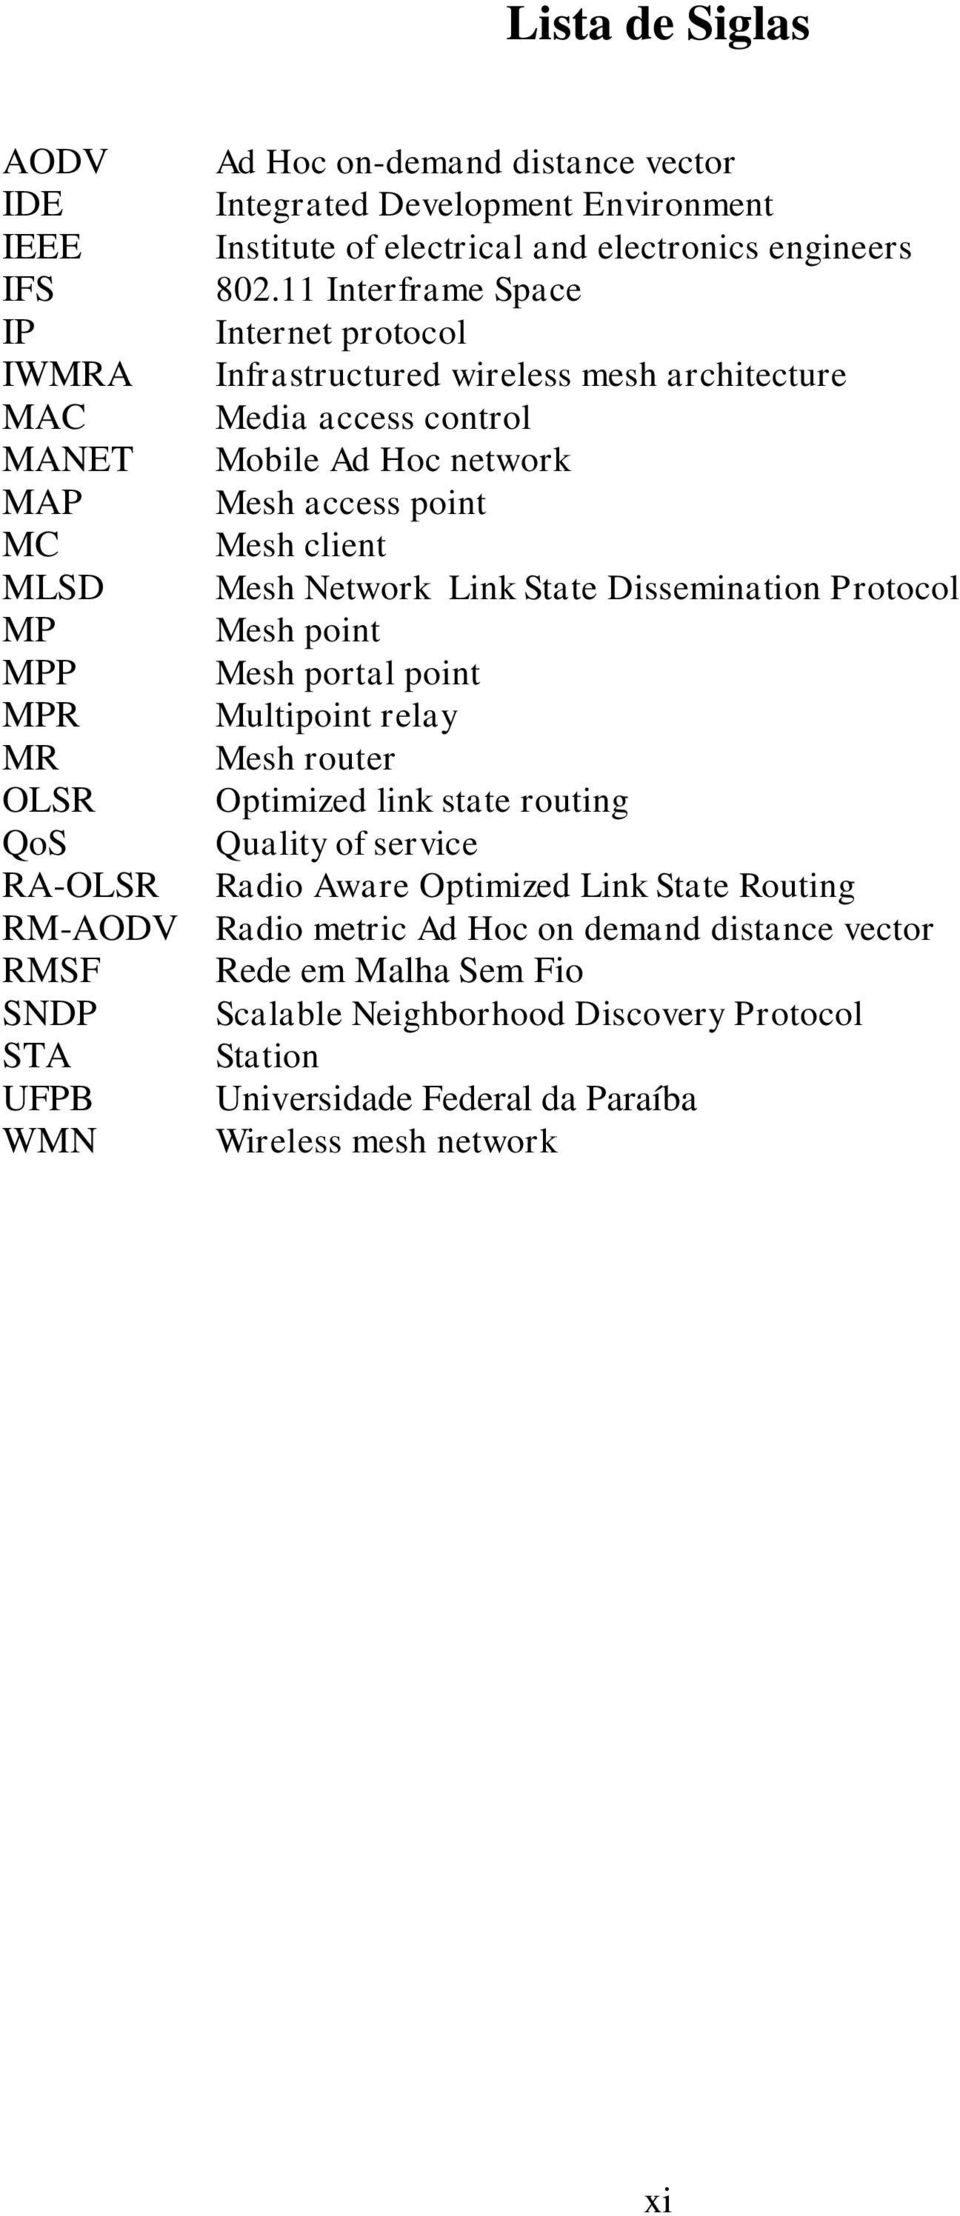 Network Link State Dissemination Protocol MP Mesh point MPP Mesh portal point MPR Multipoint relay MR Mesh router OLSR Optimized link state routing QoS Quality of service RA-OLSR Radio Aware